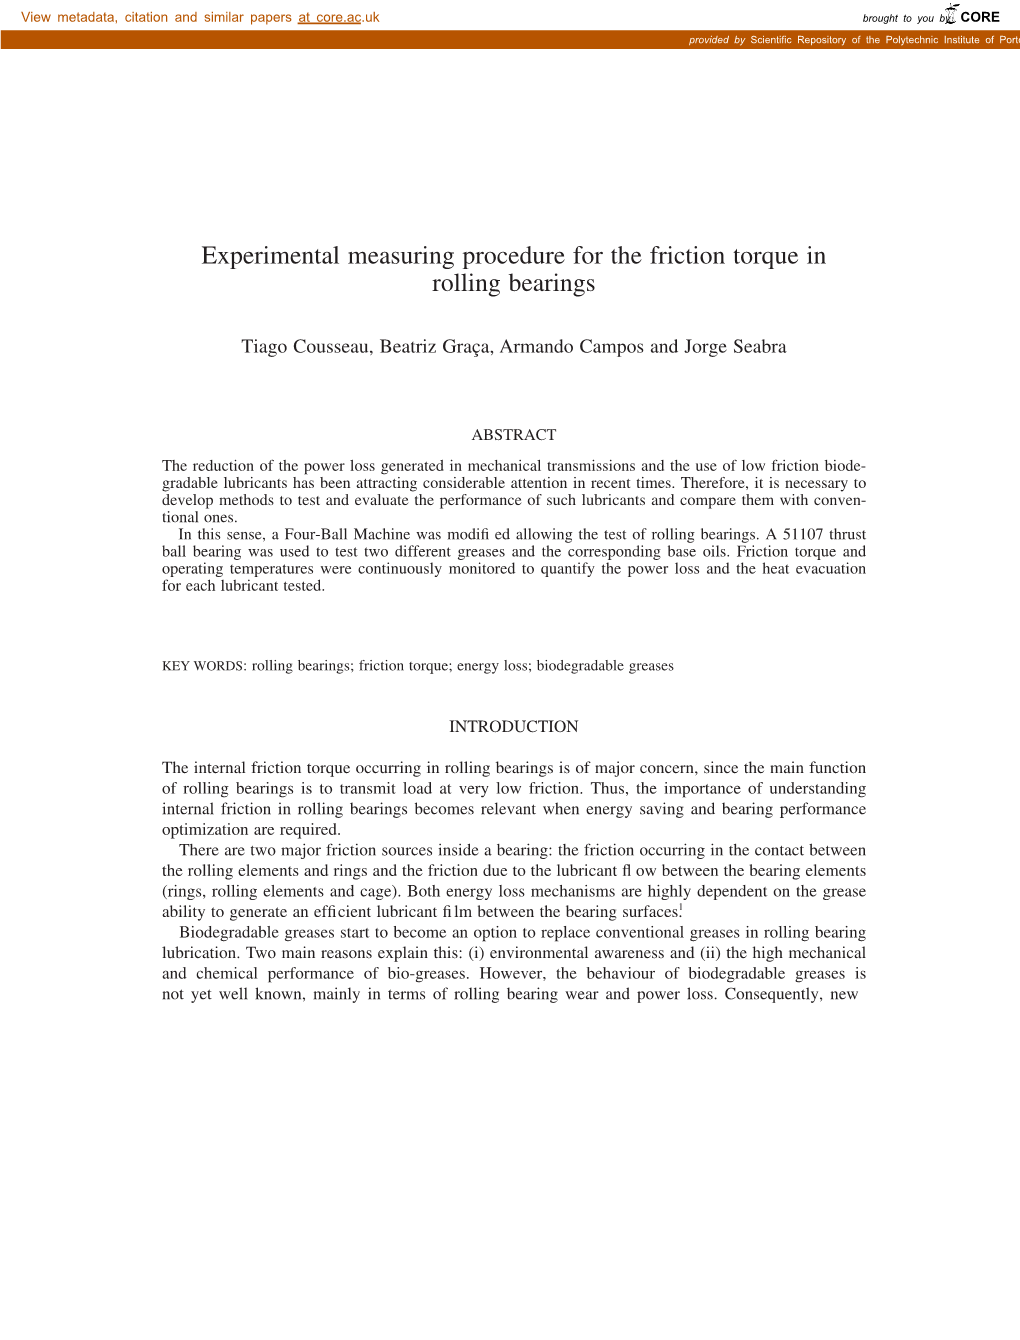 Experimental Measuring Procedure for the Friction Torque in Rolling Bearings